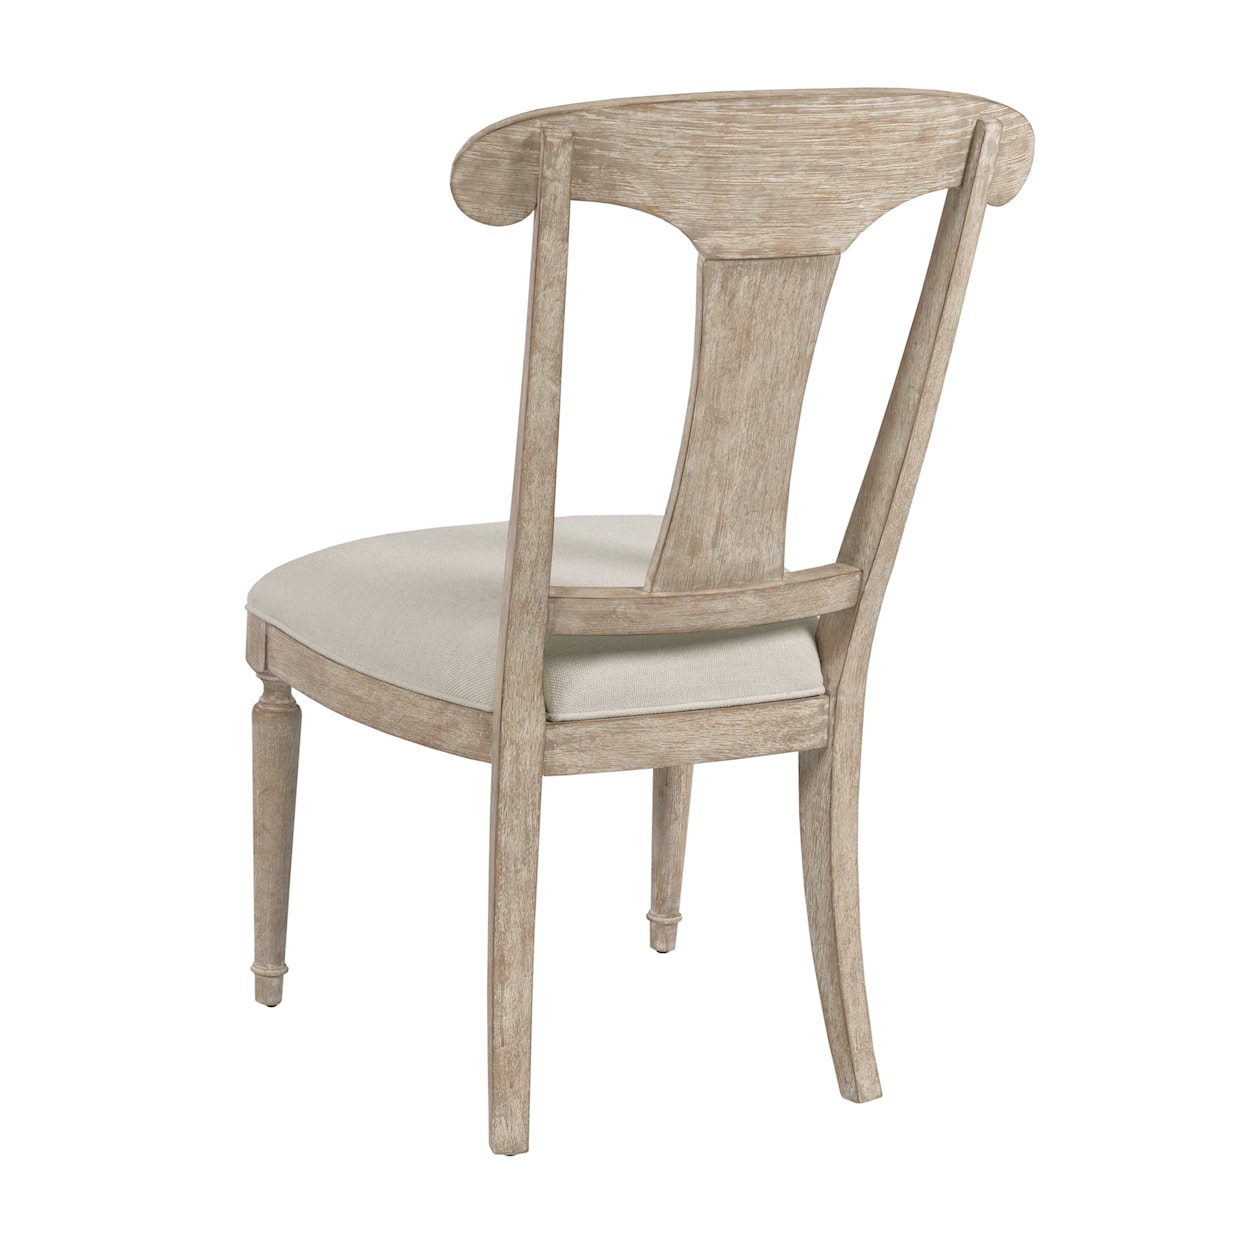 American Drew Cambric Maeve Wood Back Side Chair - Breve